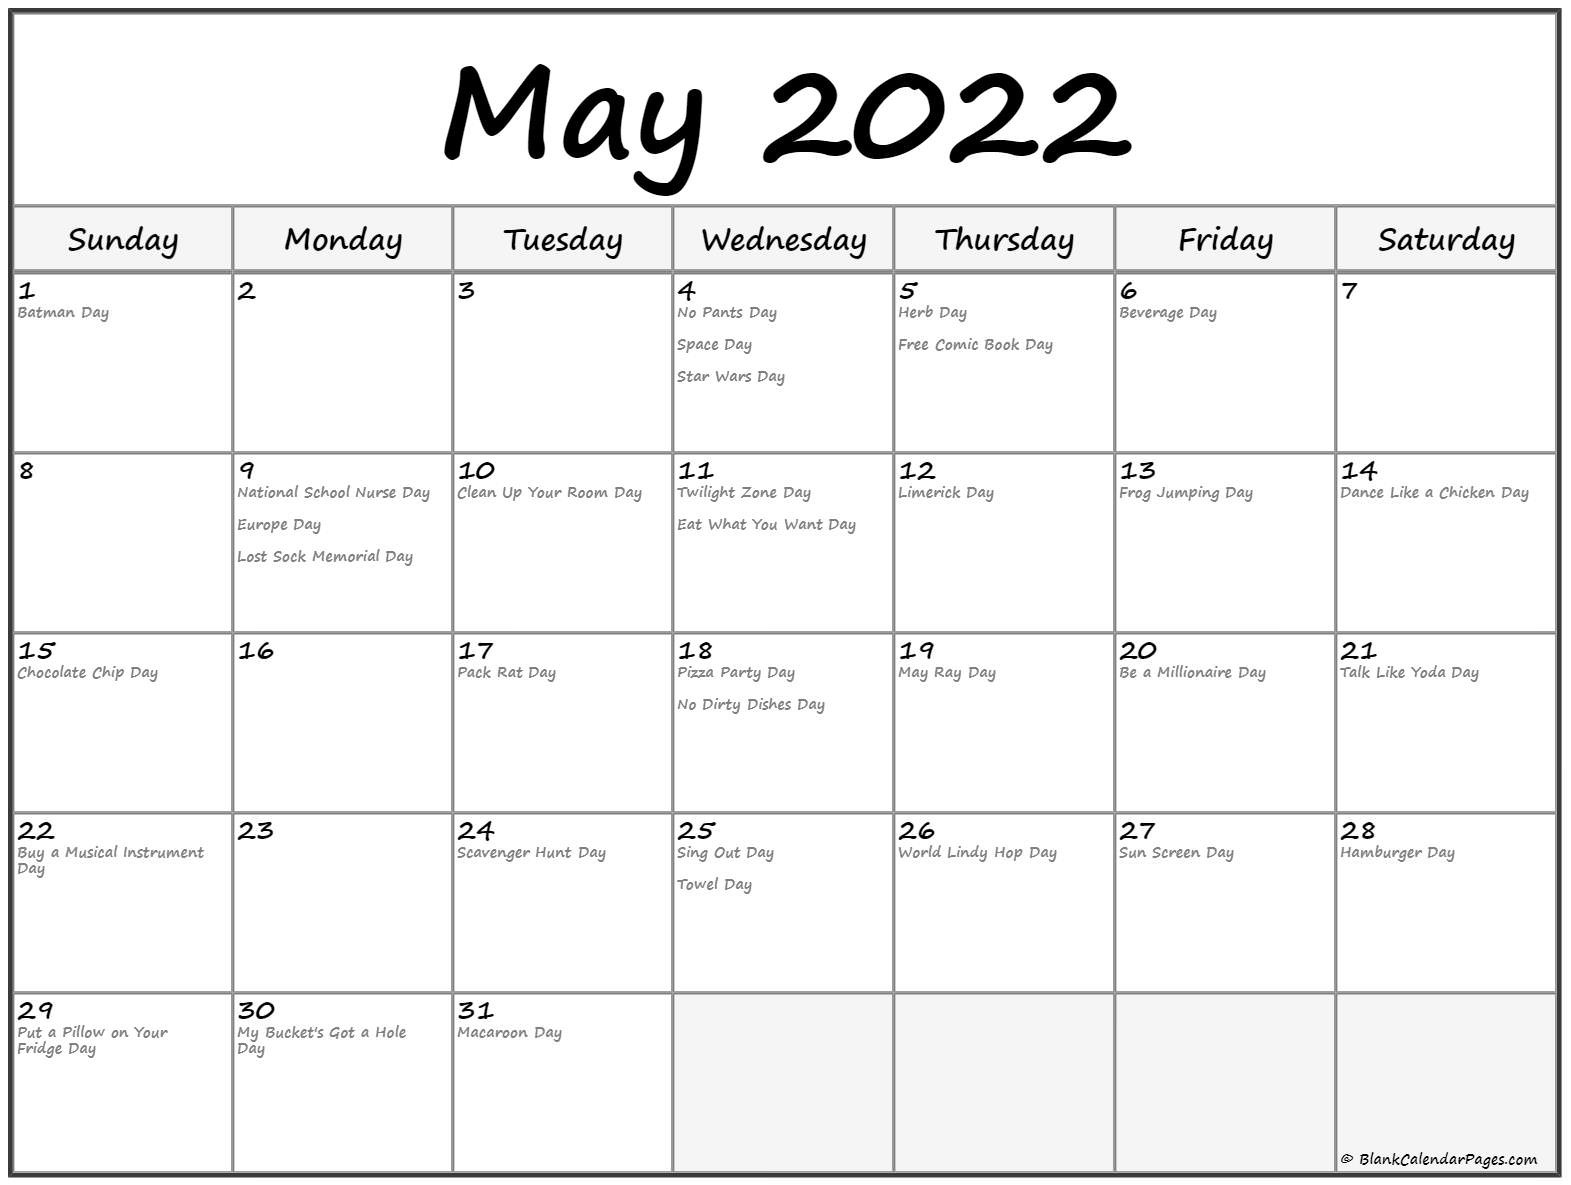 Printable Calendar 2022 : Calendar For 2022 Royalty Free  Astronomy Picture Of The Day May 22 2022